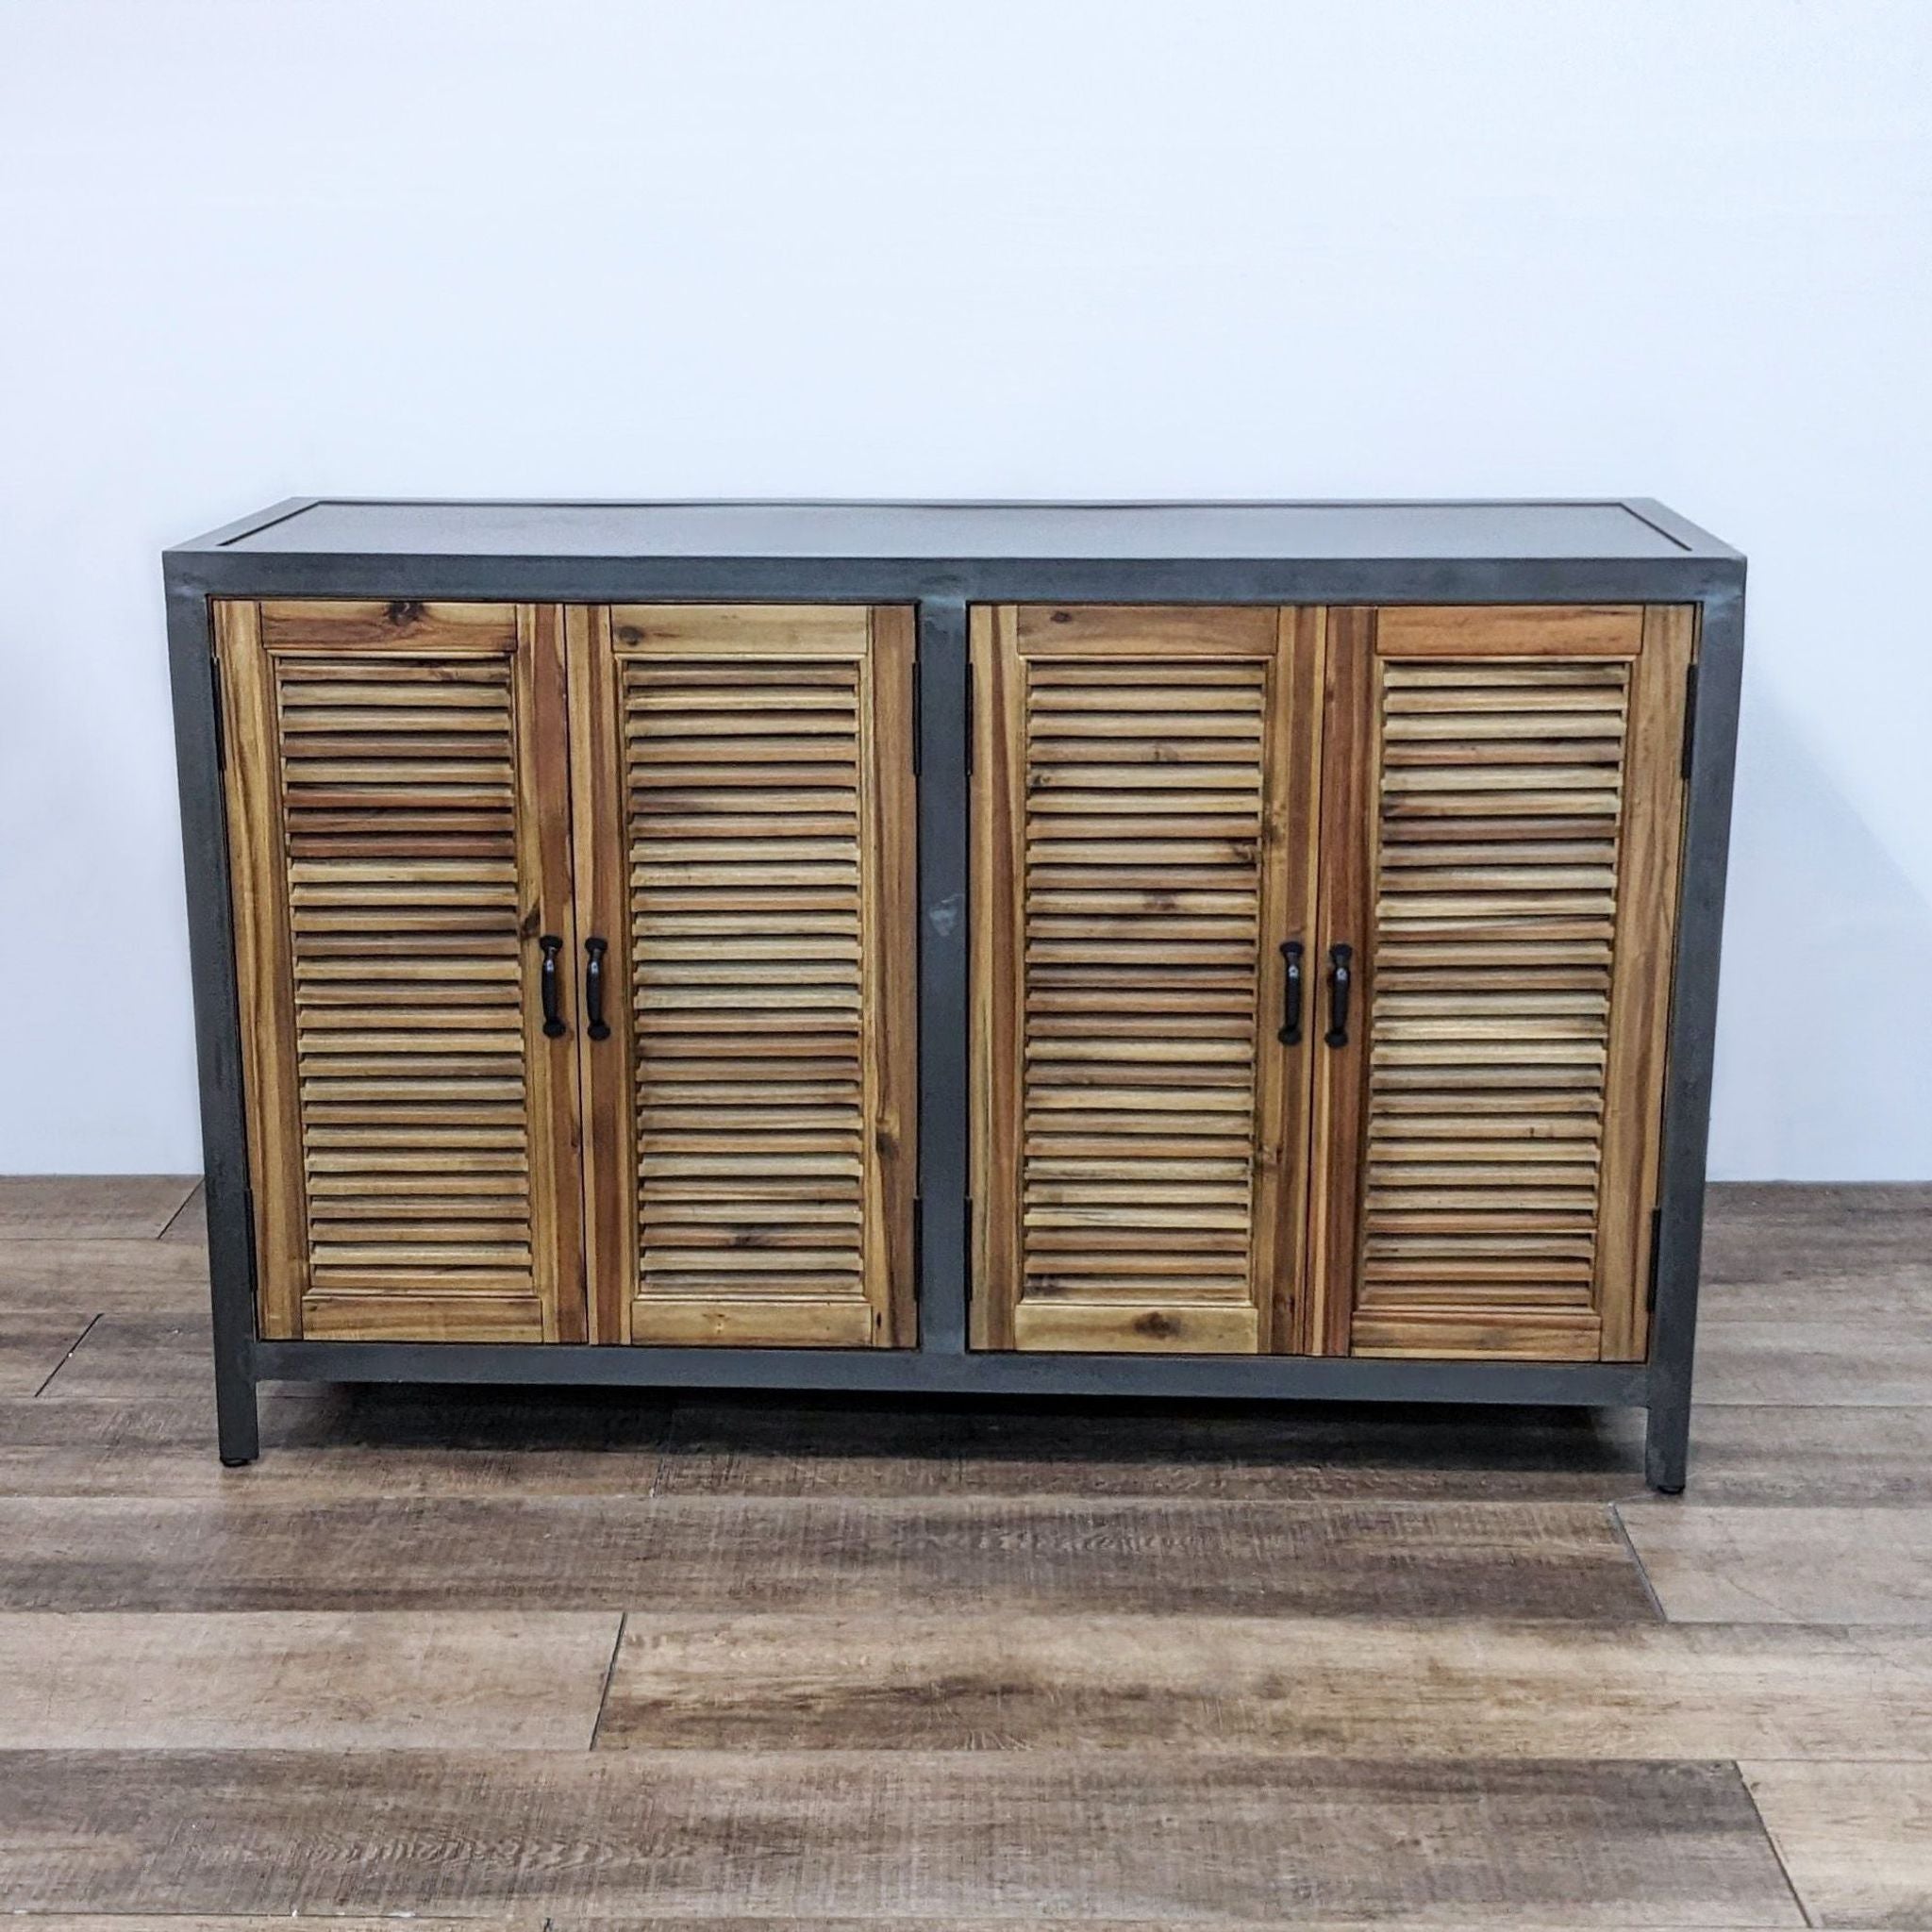 Industrial-style World Market sideboard with closed louvered cabinet doors on metal frame.